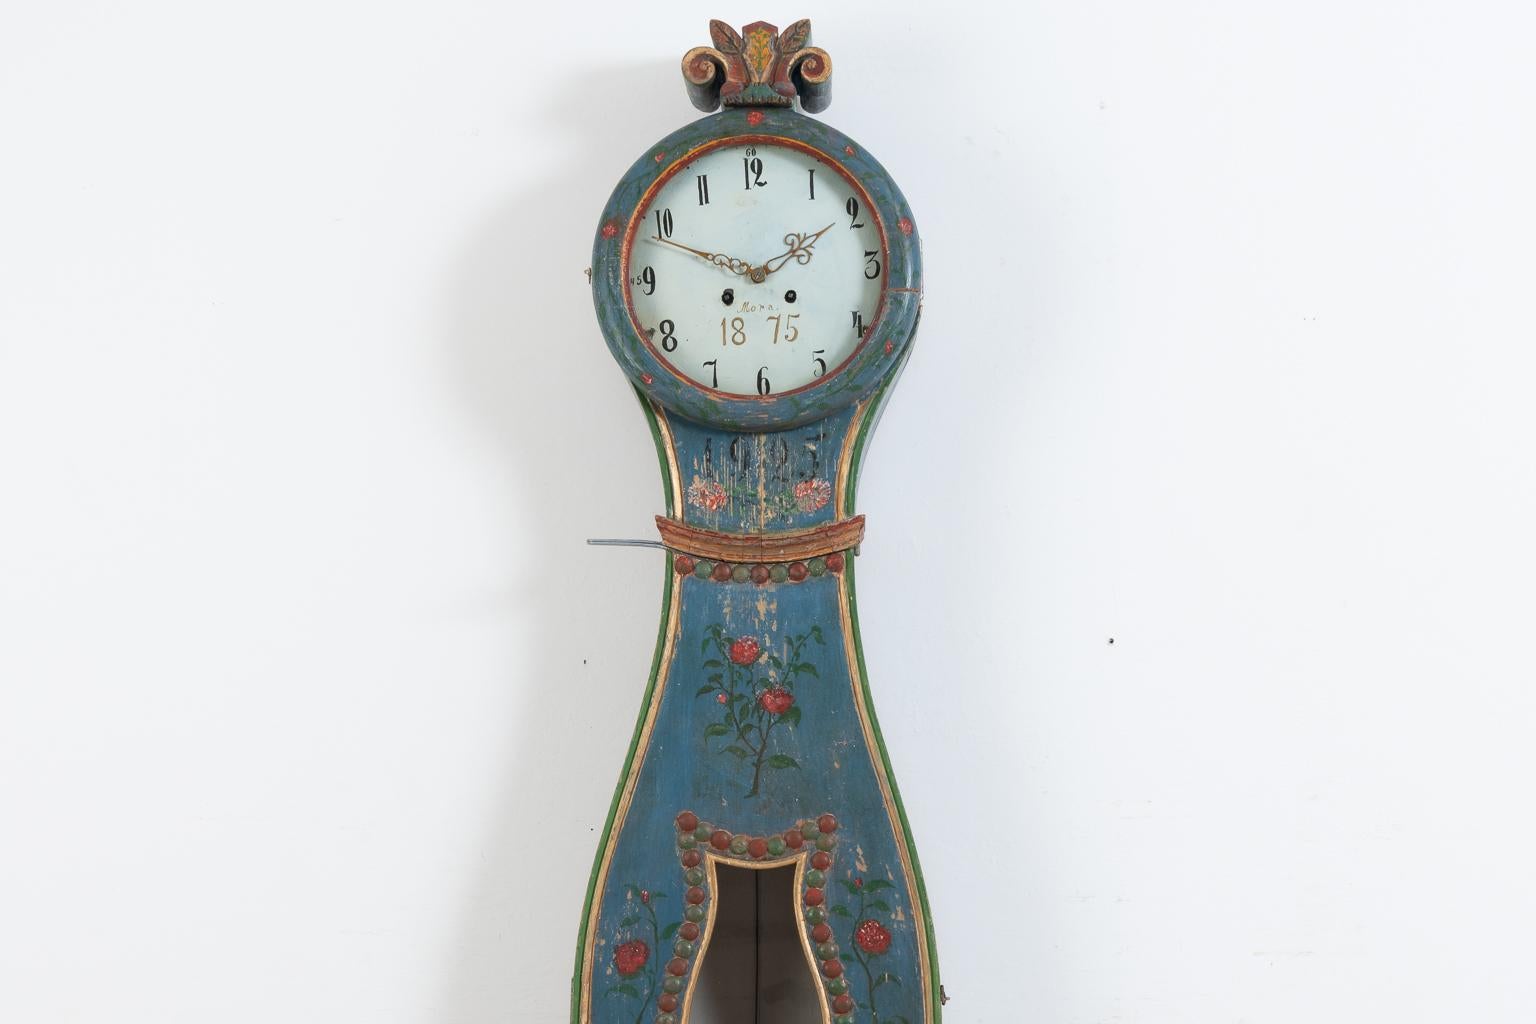 Northern Swedish long case clock. Manufactured during the mid-19th century from Swedish pine. The clock was renovated and repainted in 1925. The clock comes with the original clockwork, two iron weights and pendulum. The clockwork is not serviced